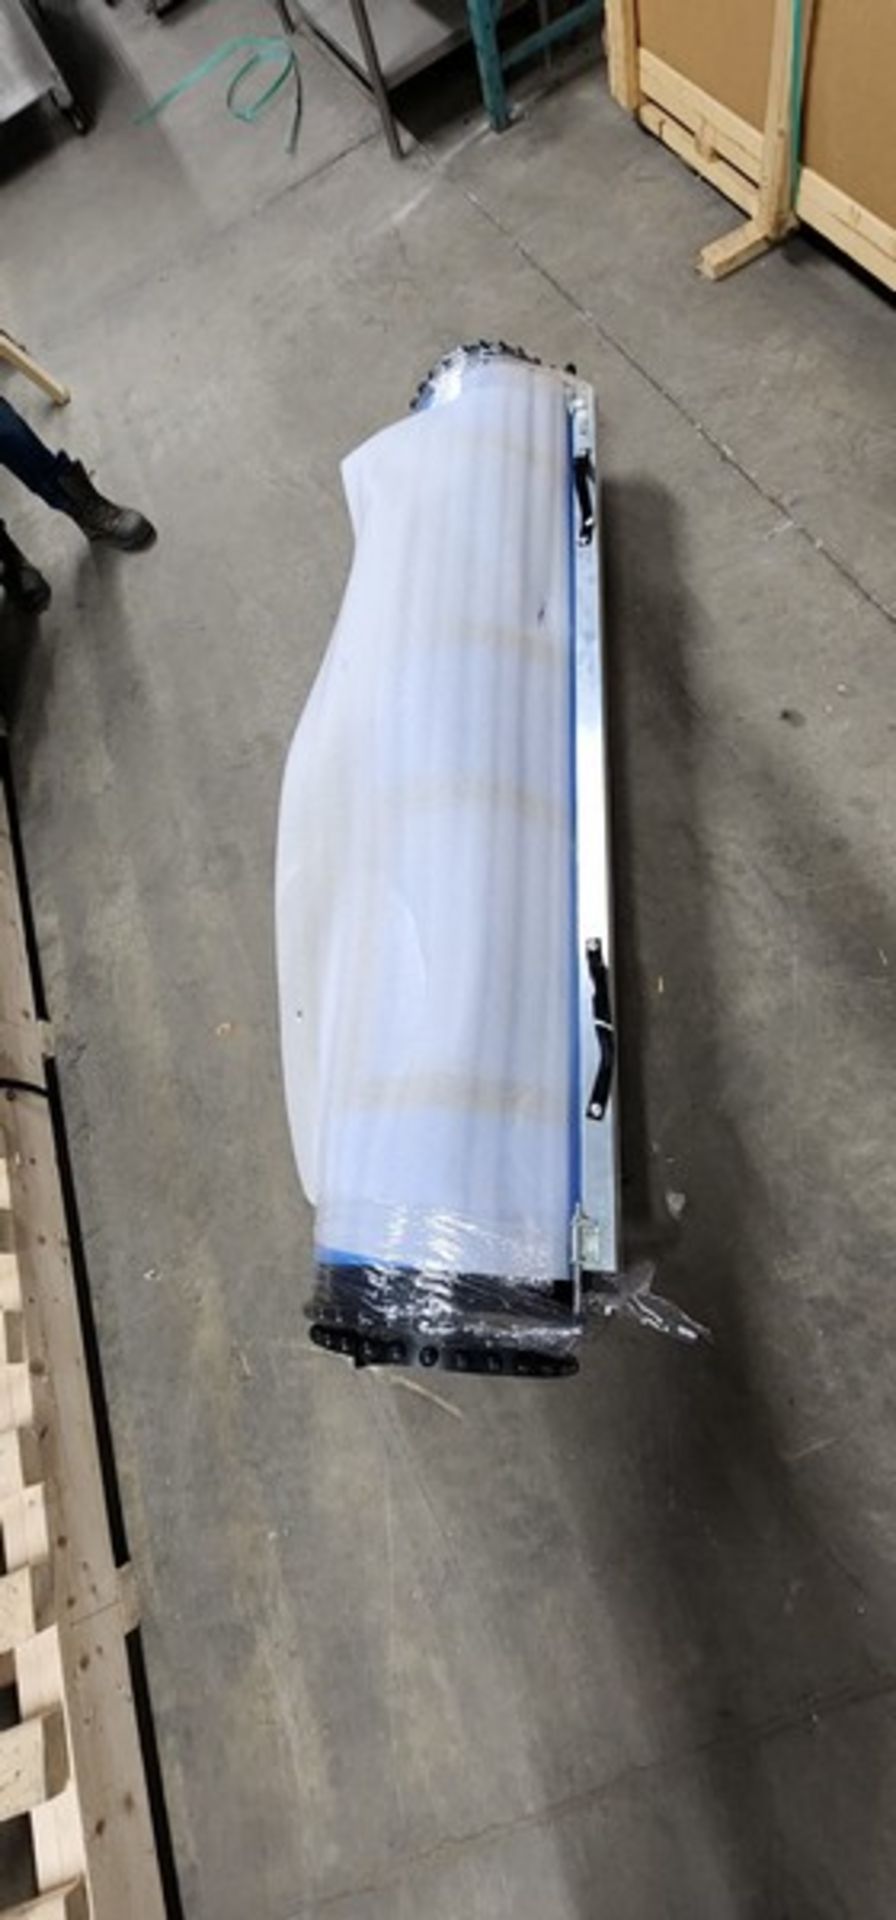 1 x Brand New in the box Fastrax Rite-Hite High Speed Door. C84. 6 feet large by 9 feet height. - Image 5 of 6